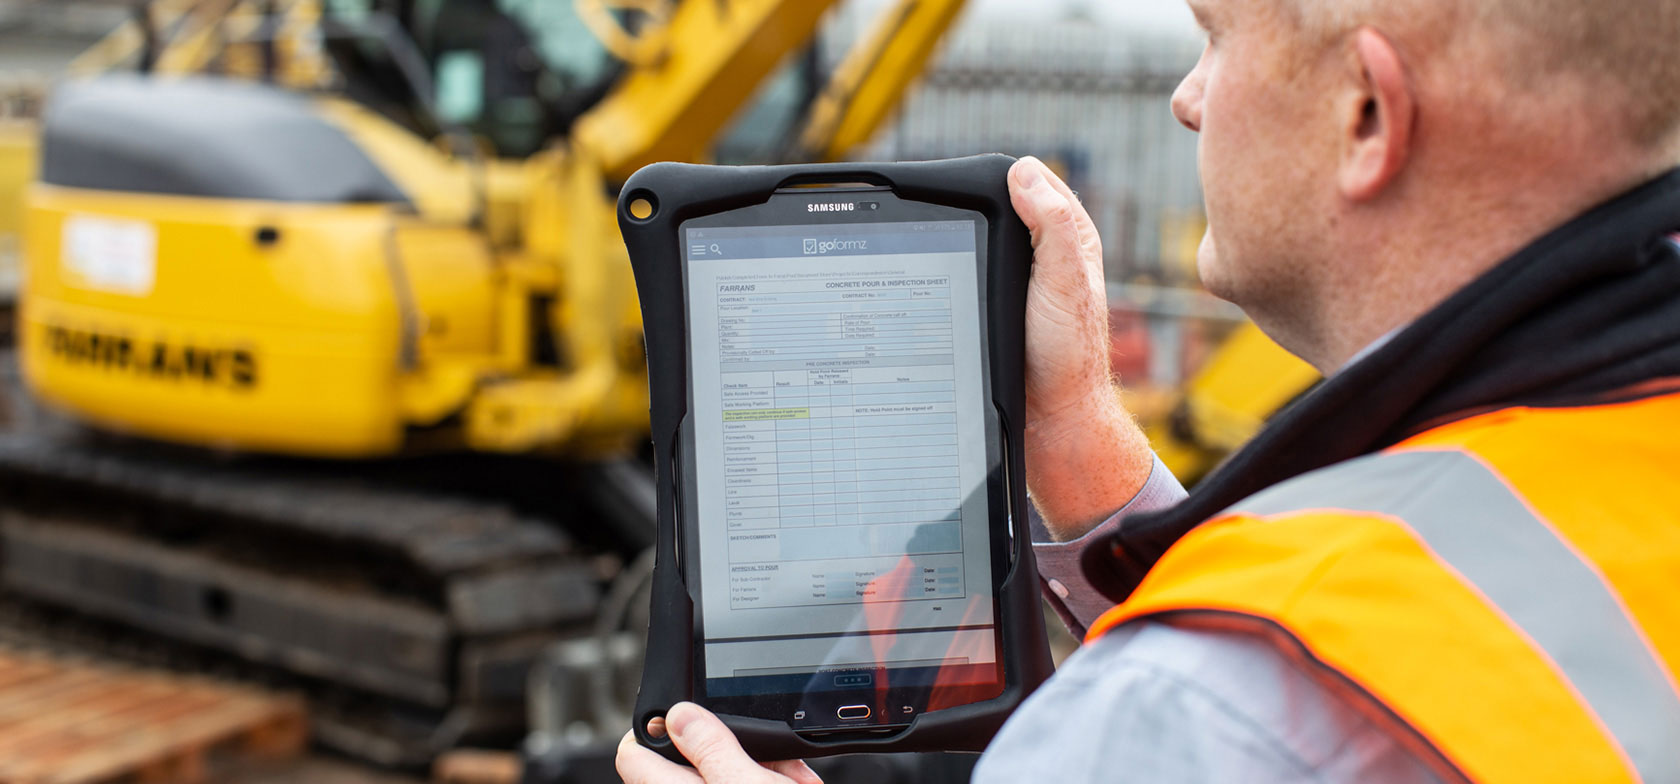 Farrans Construction engineer holding tablet displaying the GoFormz app, while wearing a safety vest